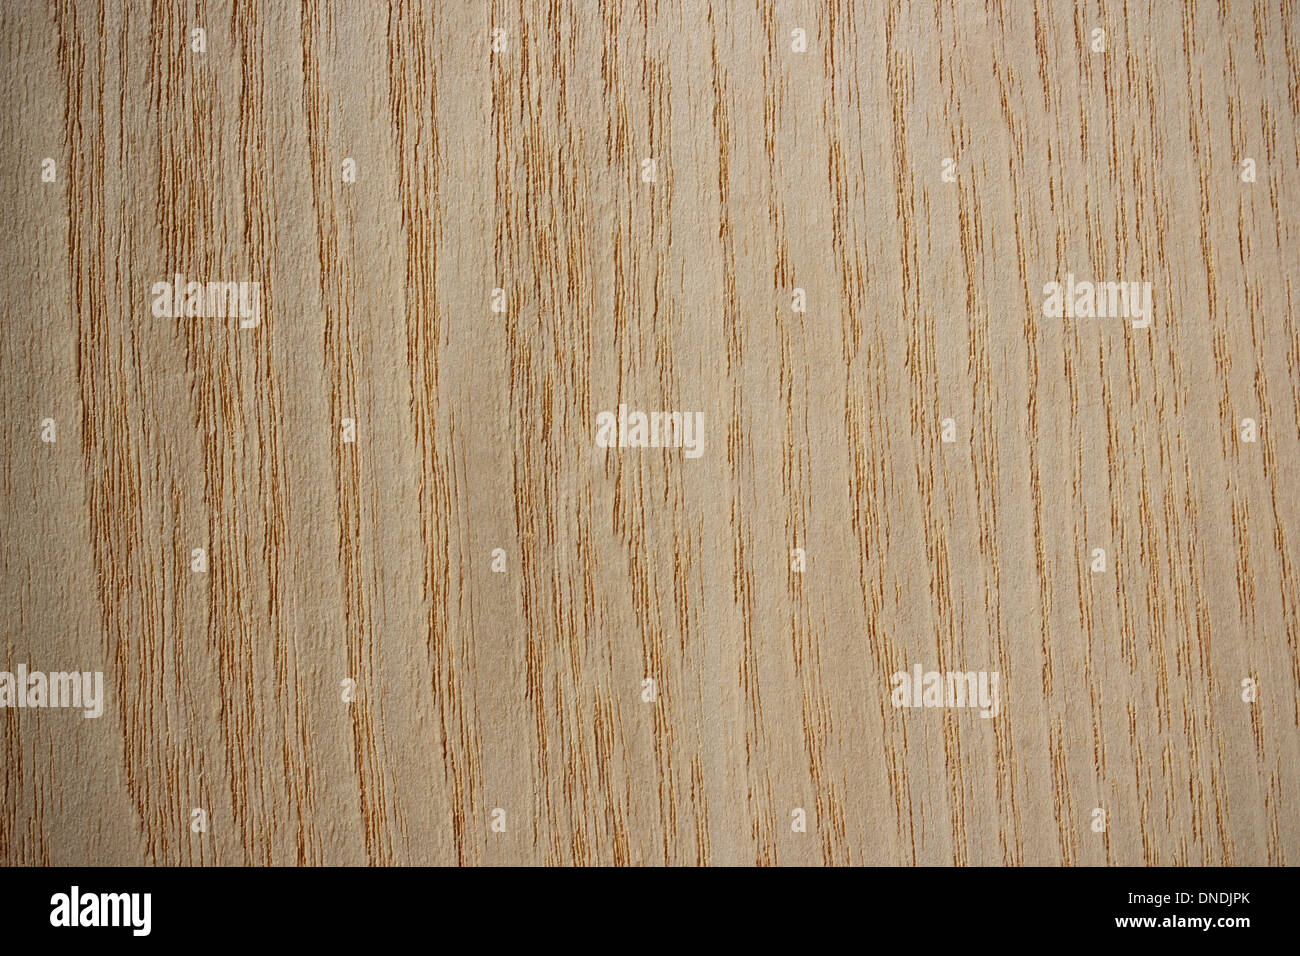 Wood surface, ash (Fraxinus) - vertical lines Stock Photo